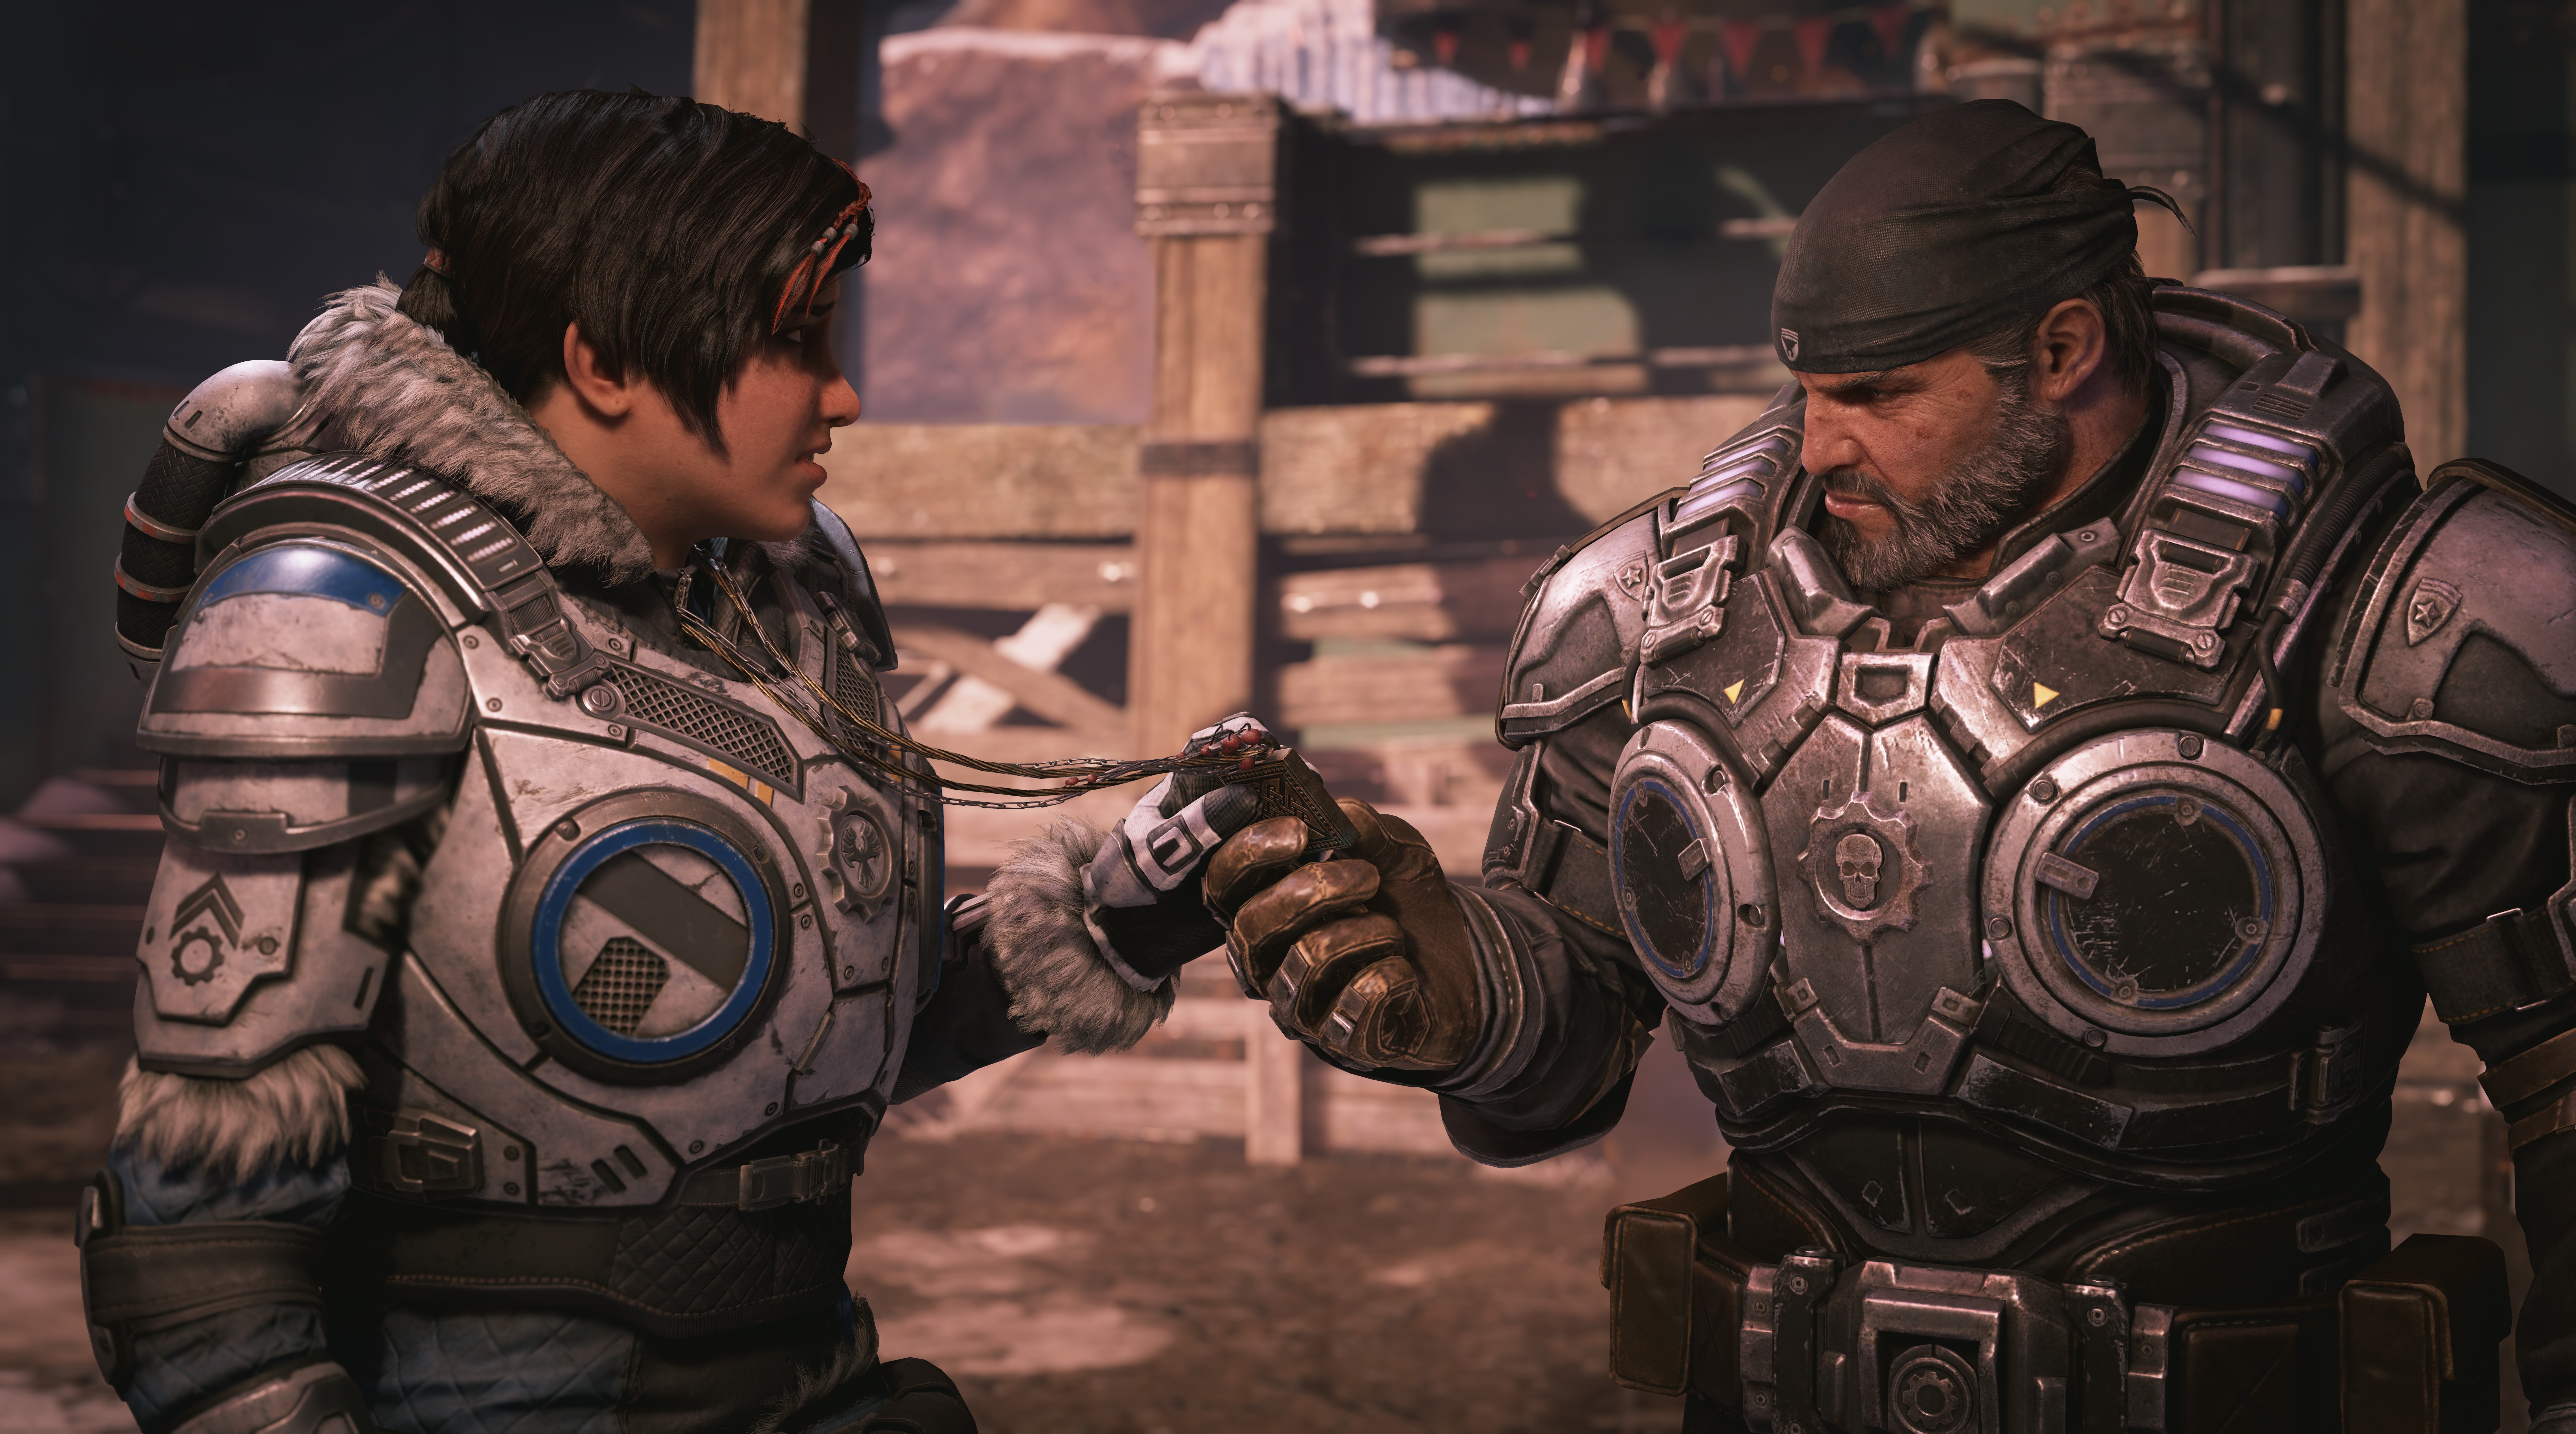 Gears 5 release date – all the latest details on the new Gears of War game